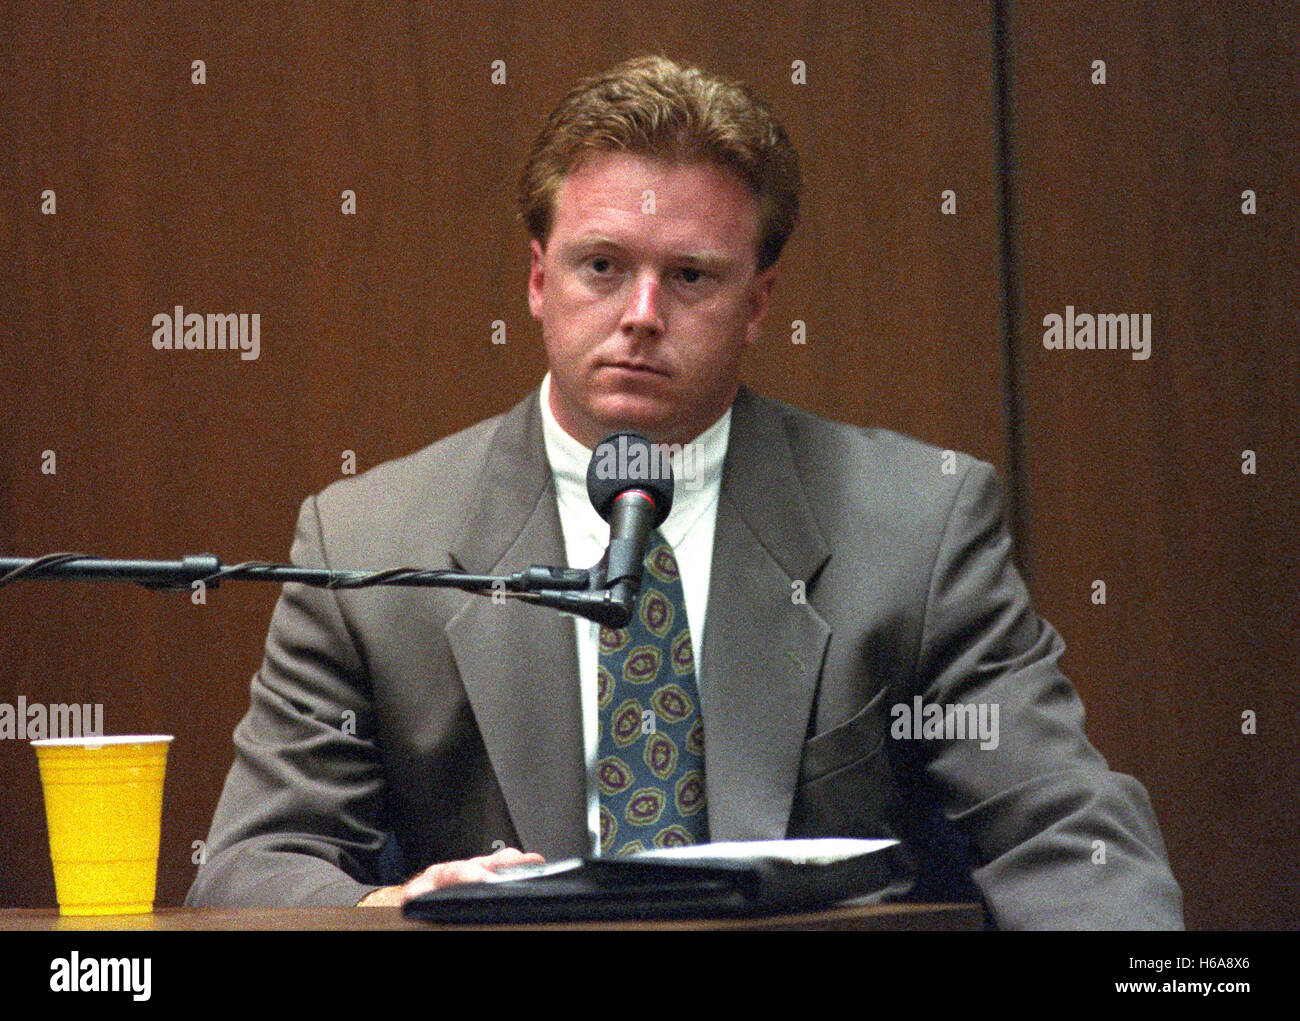 July 13, 1995 - Los Angeles, California, United States of America - Jim Merrill of the Hertz Corporation, is on the witness stand during the trial of former NFL star running back O.J. Simpson for the murder of his former wife, Nicole Brown Simpson and a friend of hers, restaurant waiter, Ron Goldman in Los Angeles County Superior Court in Los Angeles, California on July 13, 1995..Credit: Steve Grayson / Pool via CNP (Credit Image: © Steve Grayson/CNP via ZUMA Wire) Stock Photo